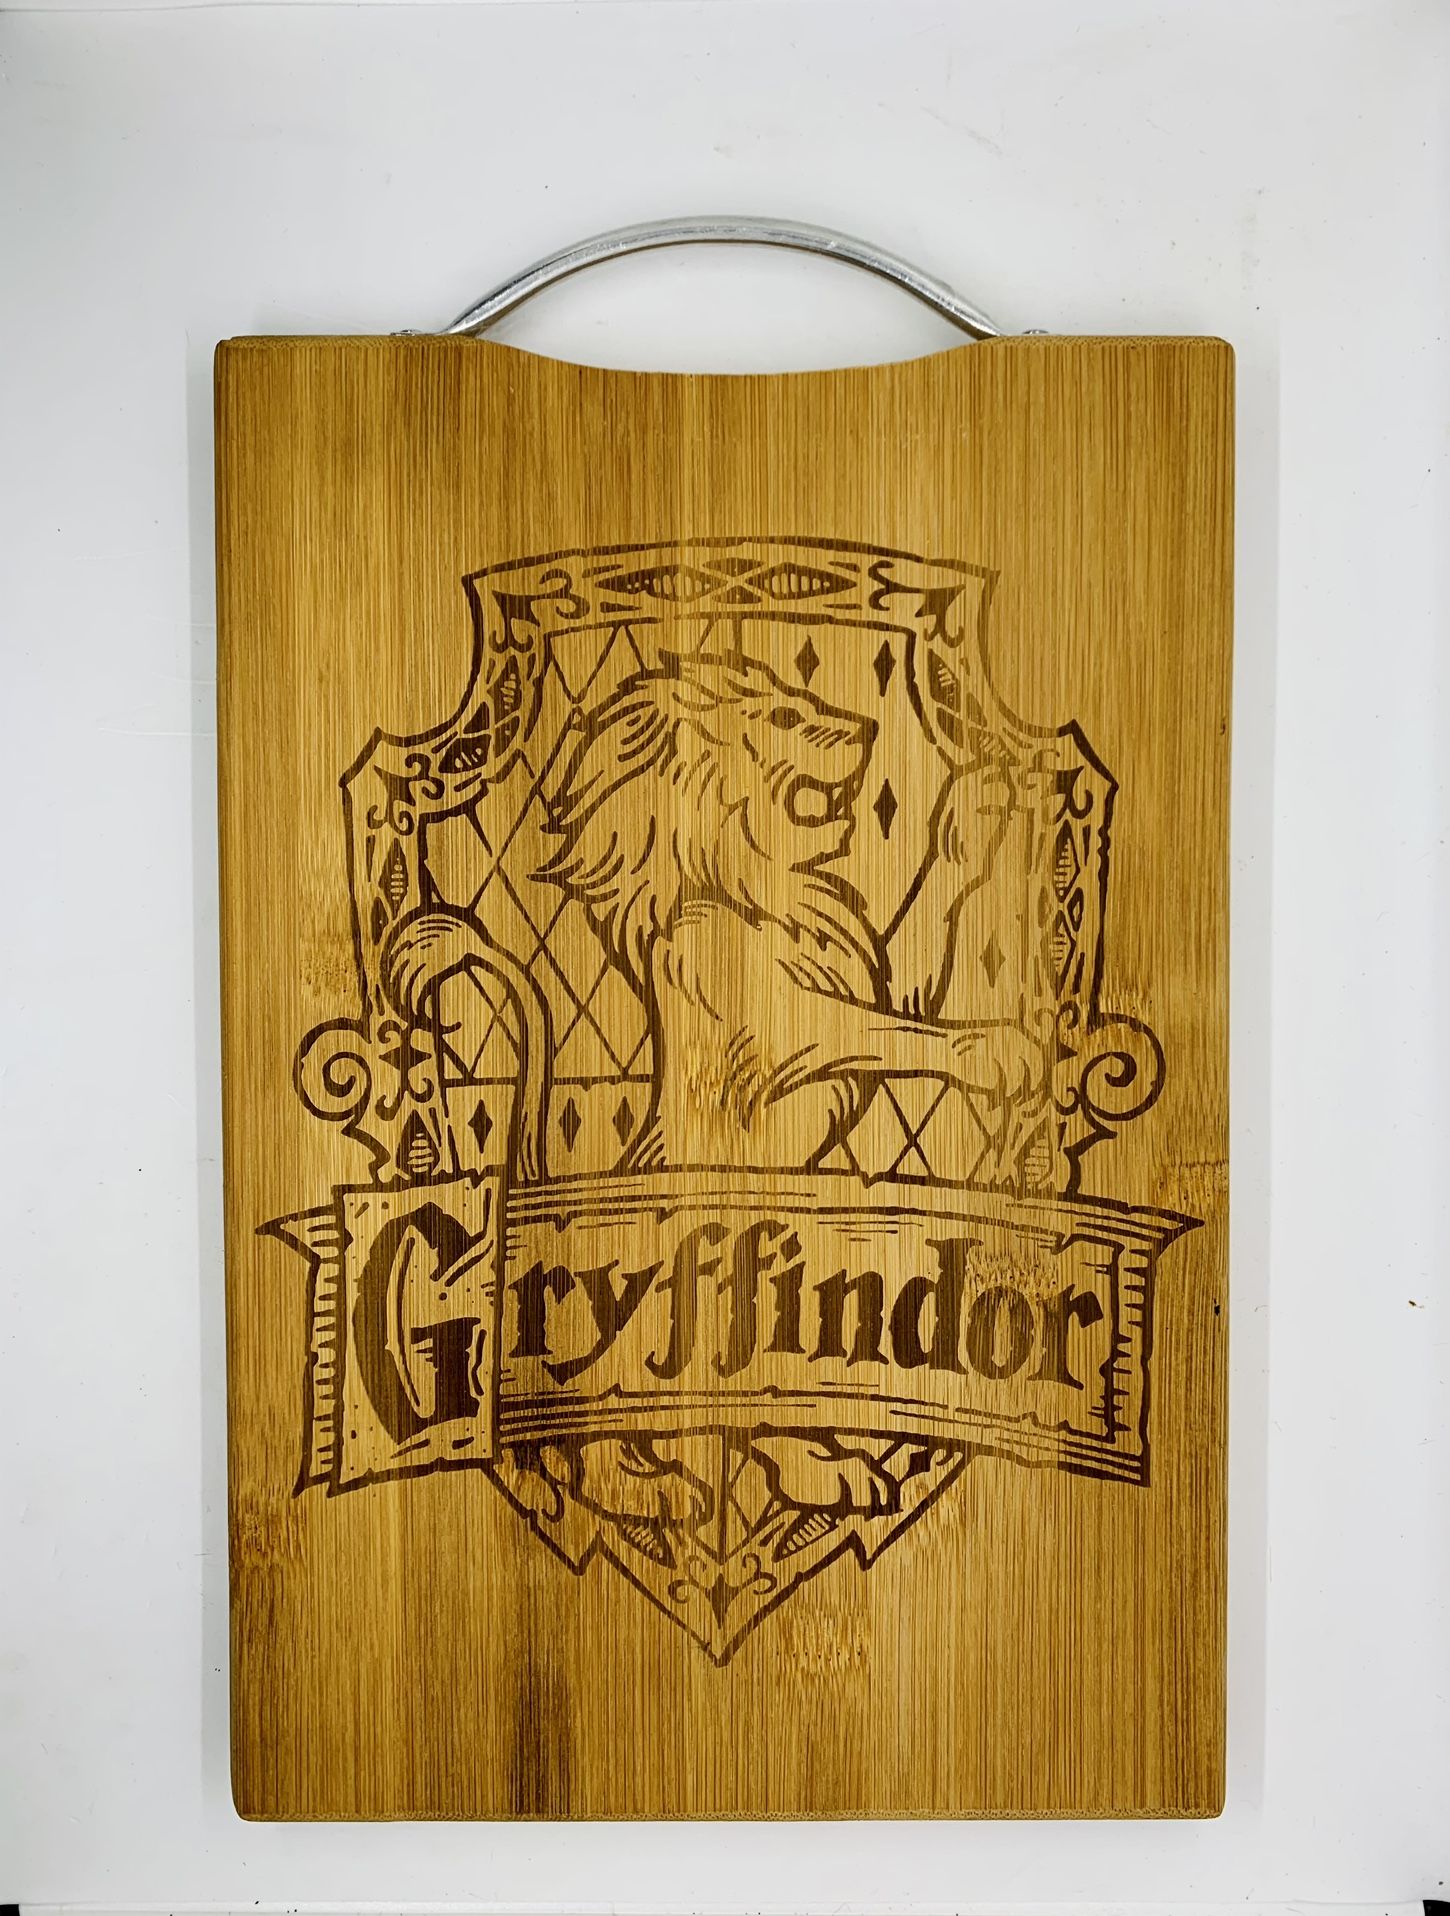 Harry potter gryffindor laser engraved bamboo high quality cuttingboard pop gift